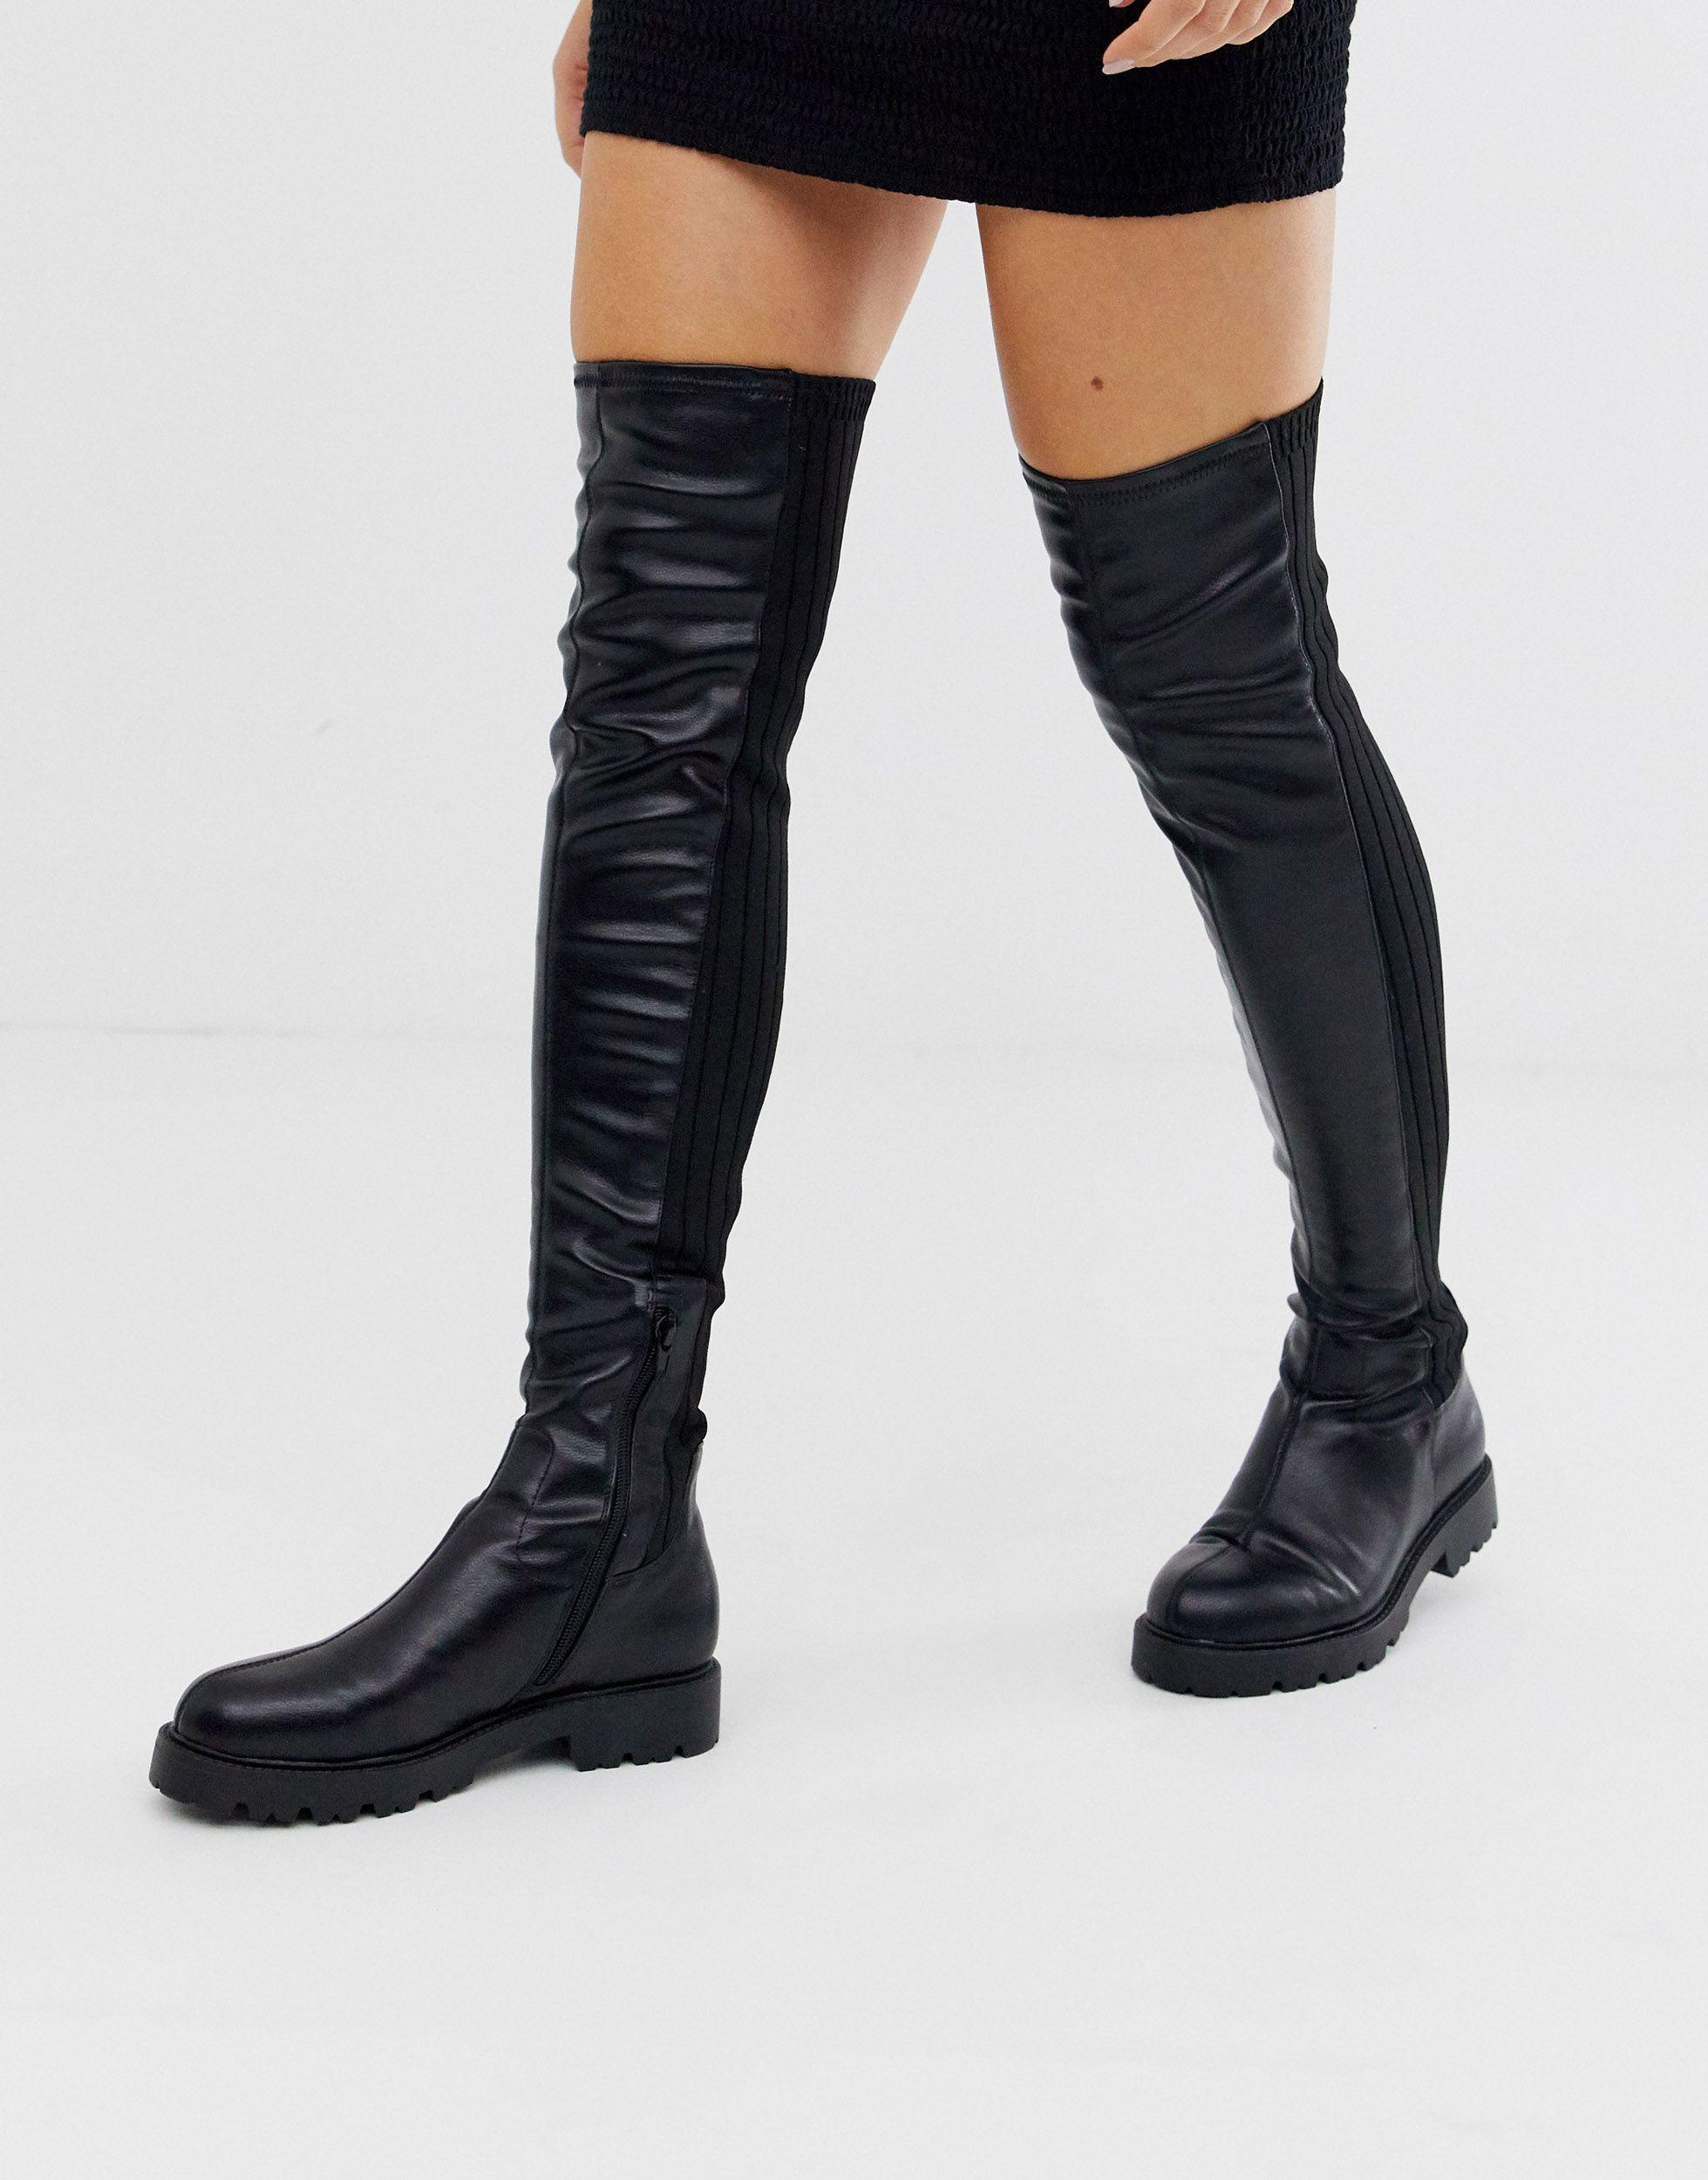 flat knee high boots Cheaper Than Retail Price> Buy Clothing ...